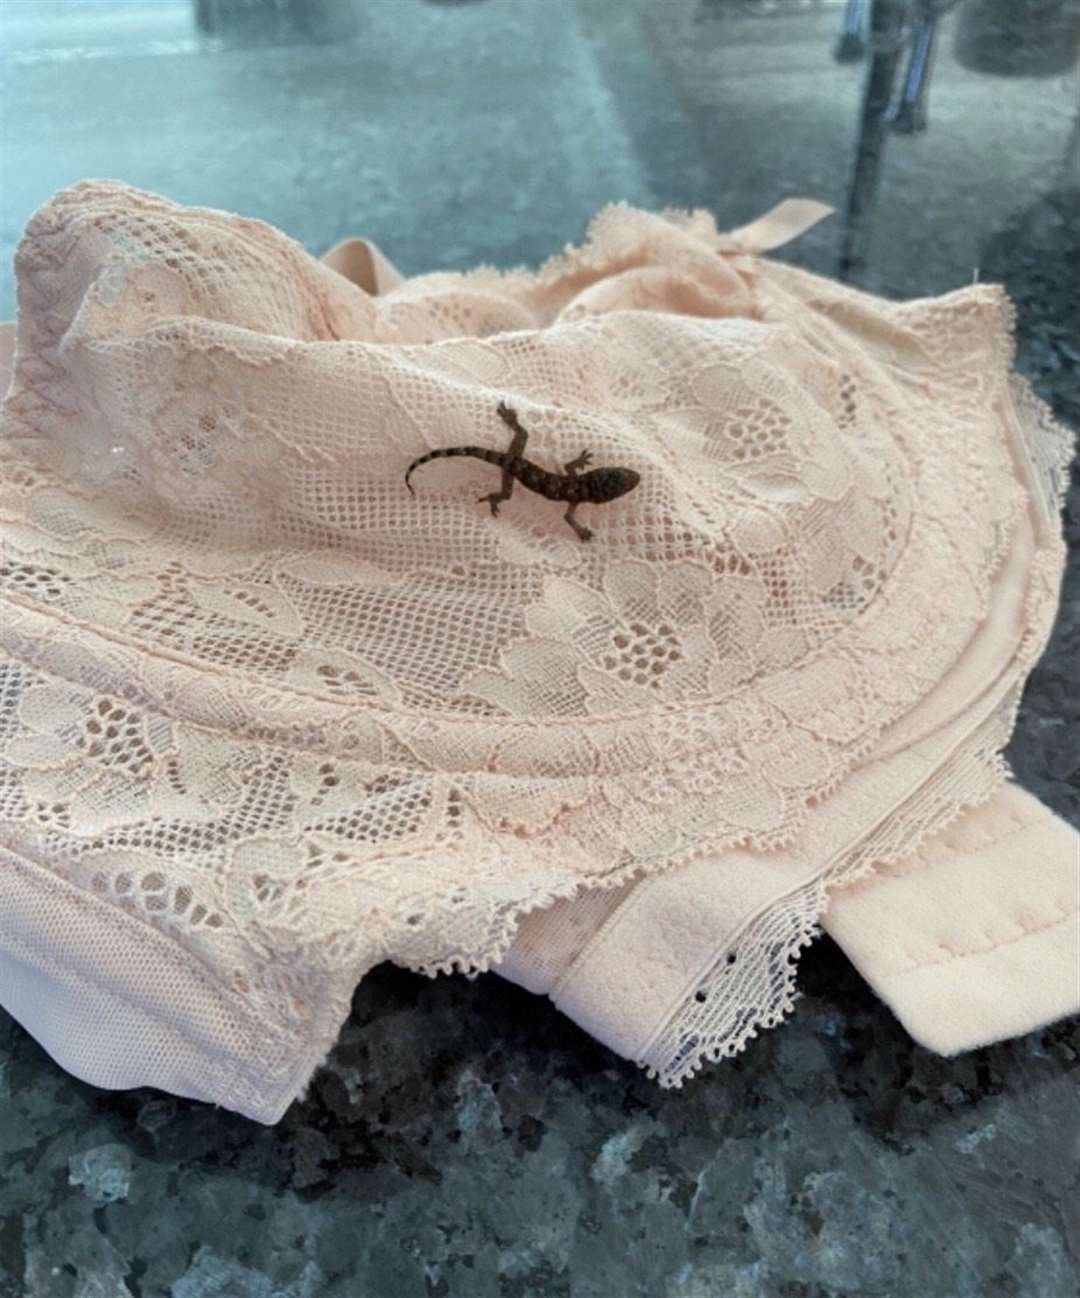 A lingerie-loving lizard travelled more than 4,000 miles in a woman’s bra from sunny Barbados to Rotherham, South Yorkshire (RSPCA/PA)